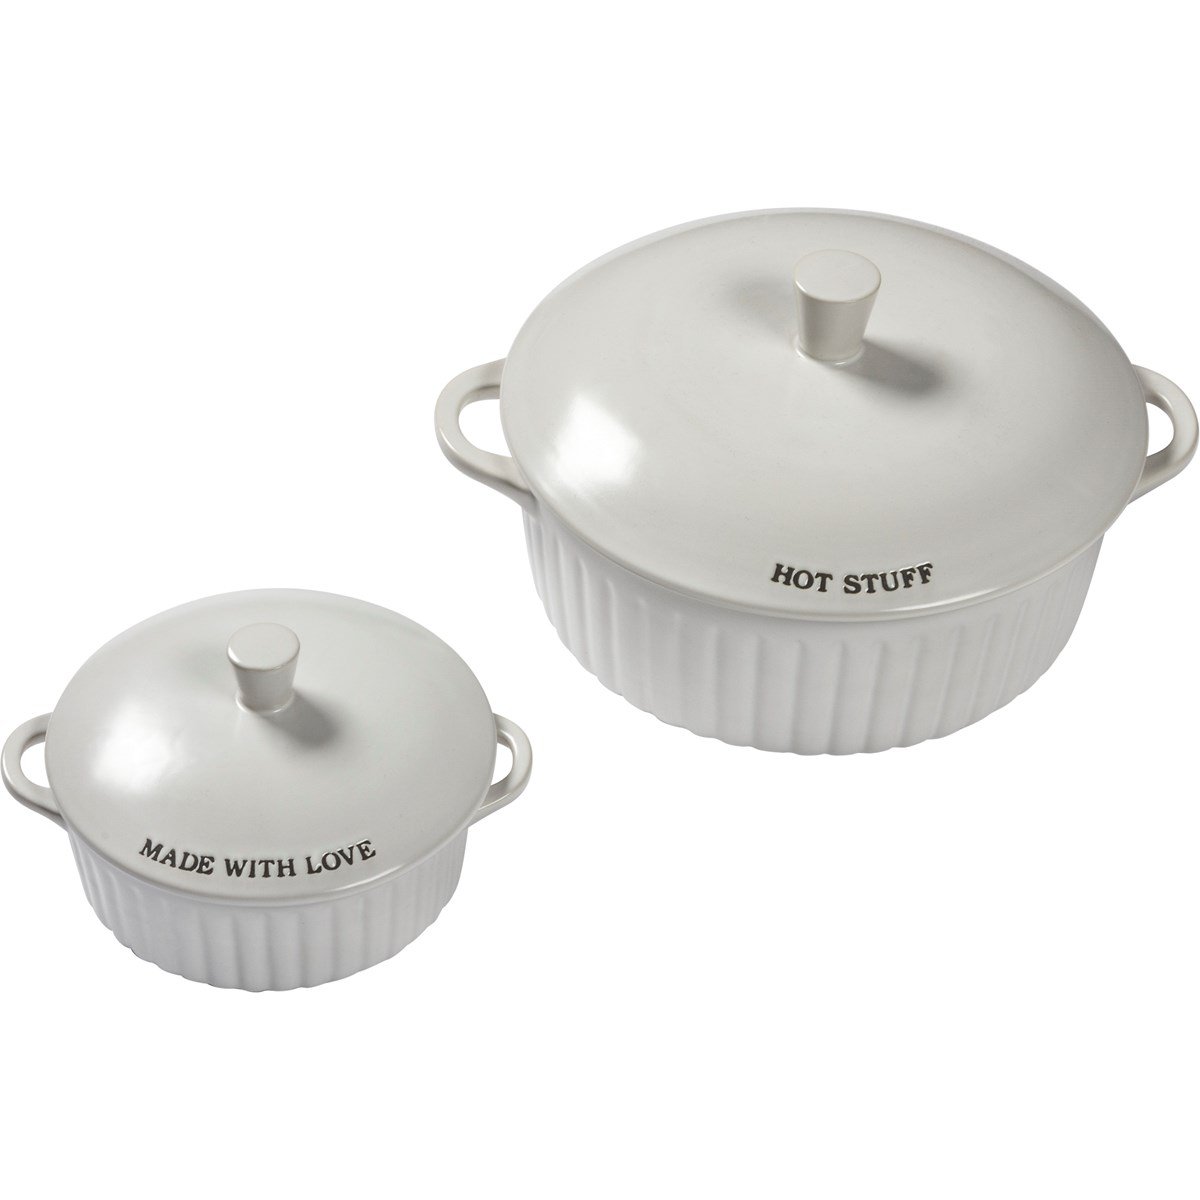 More Please Covered Casserole Set